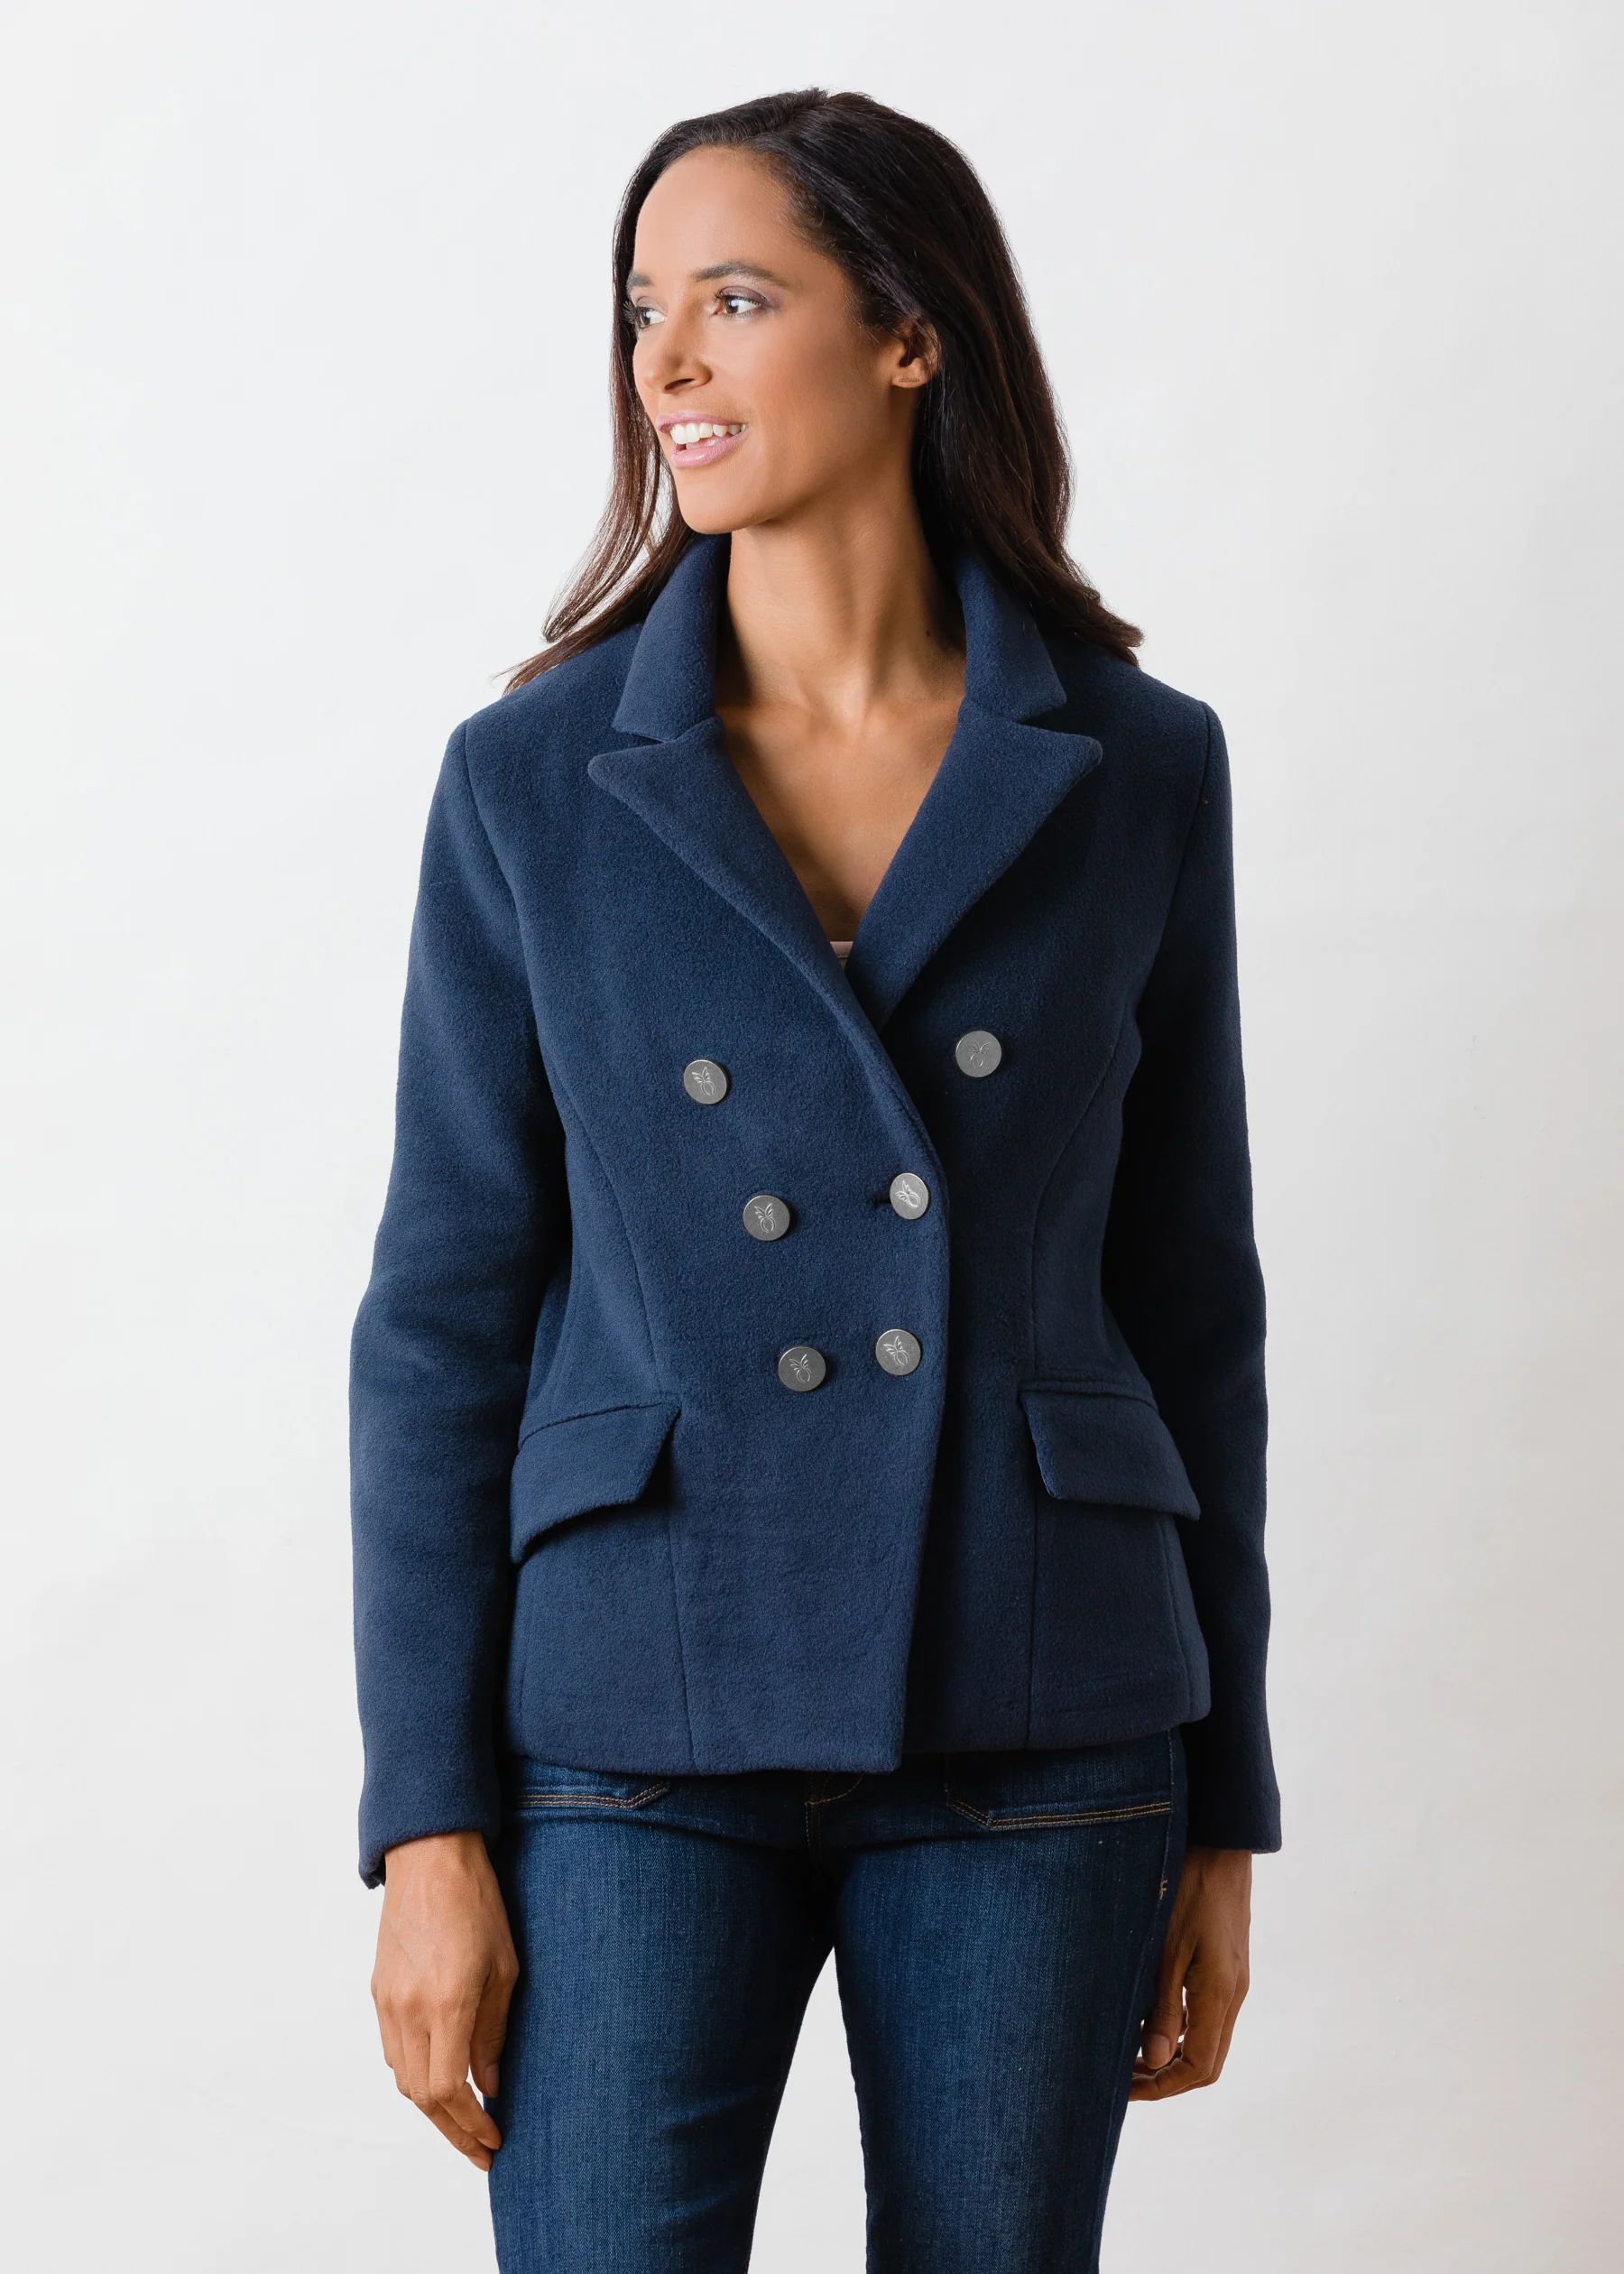 Mead Point Blazer with Double Layer Vello Fleece Silver Buttons (Navy) | Dudley Stephens